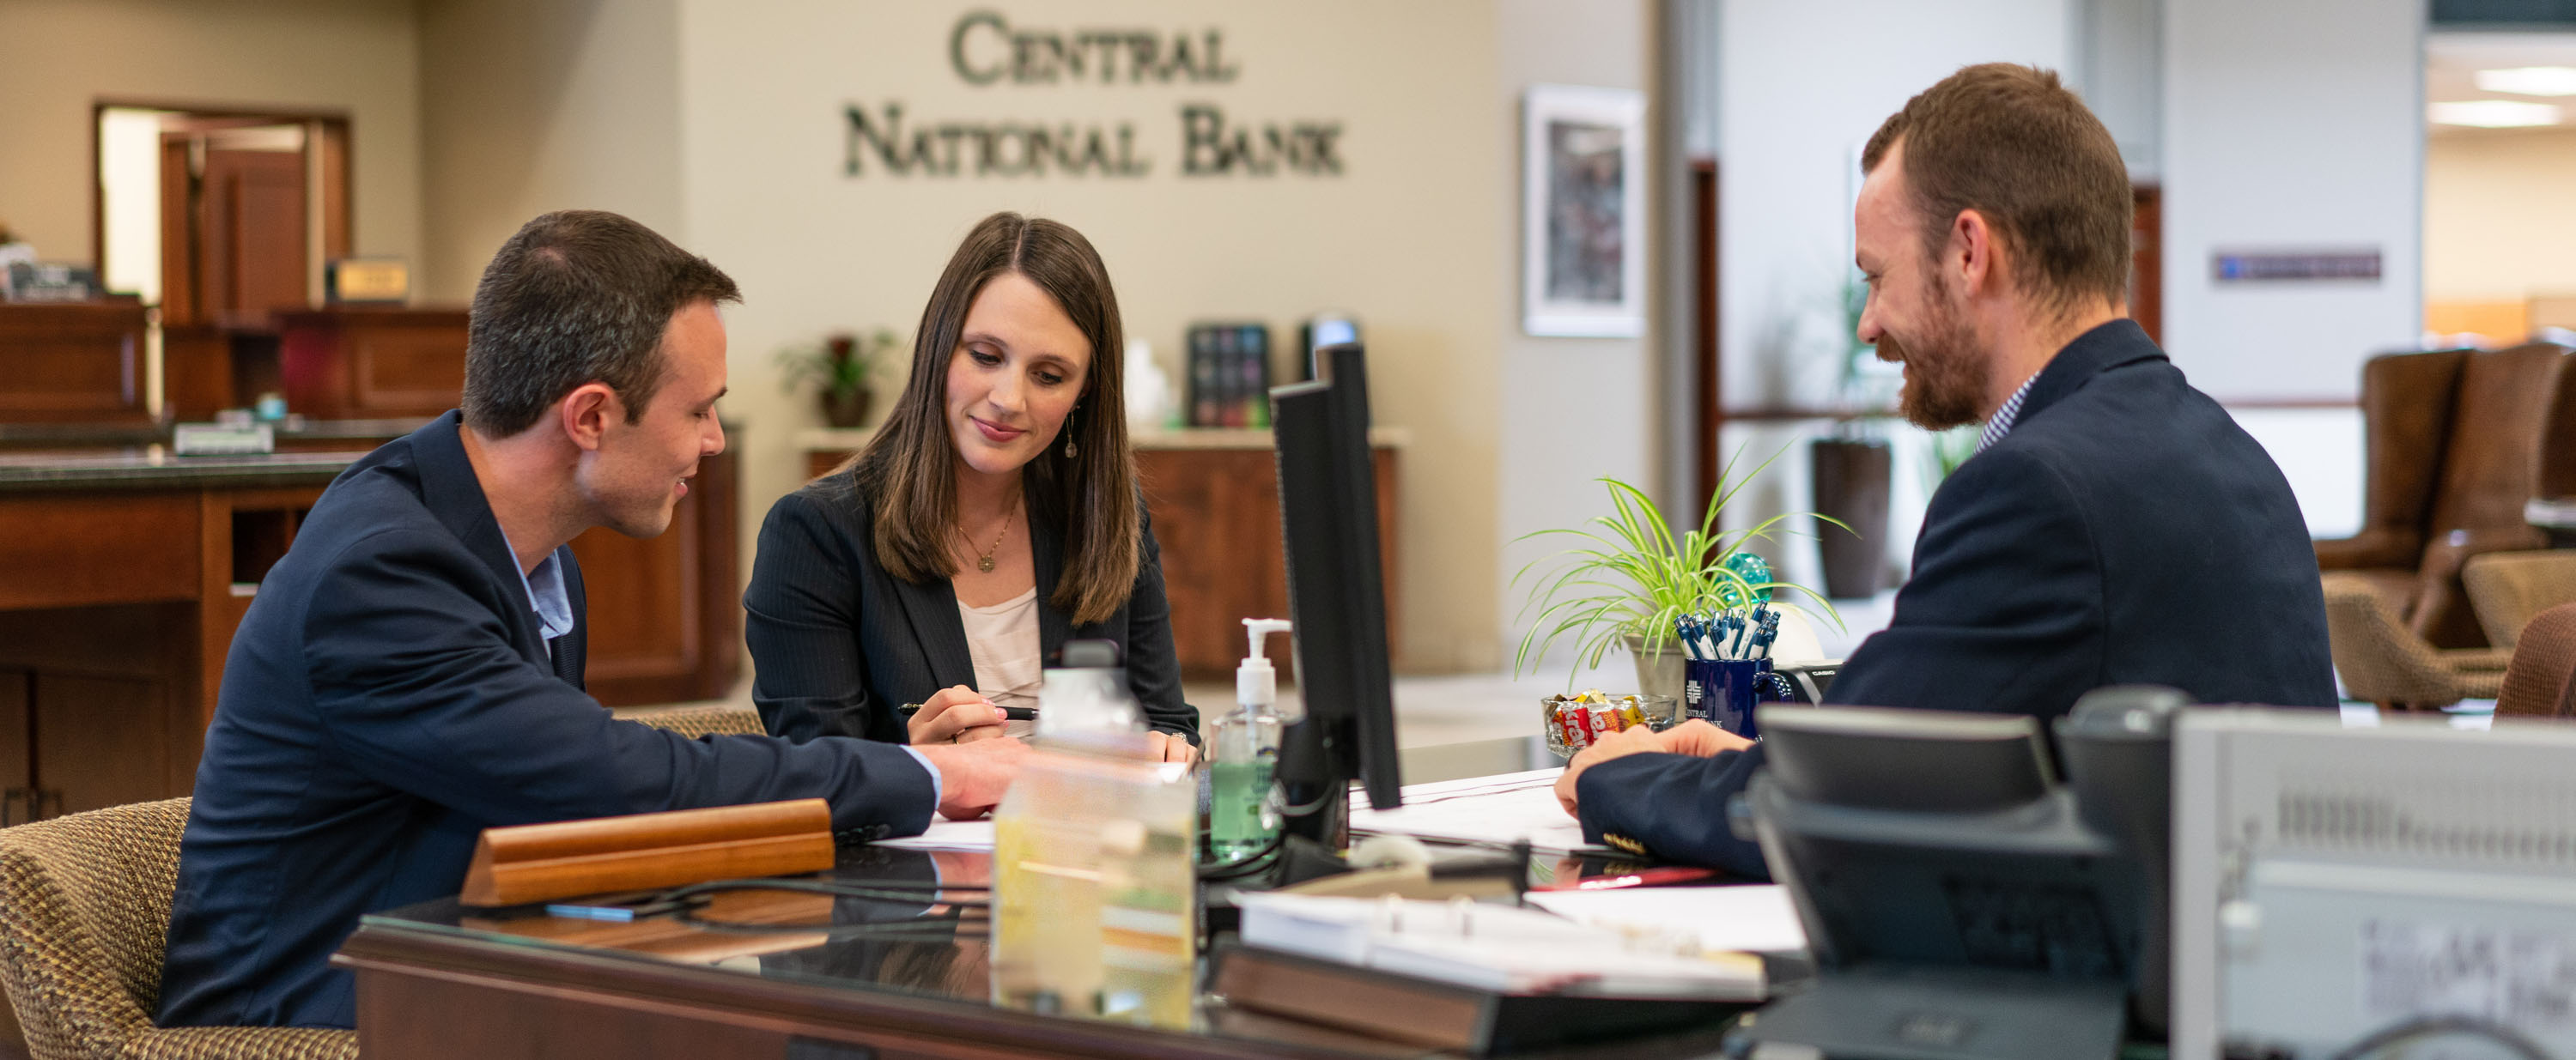 Central Texas Personal Banking